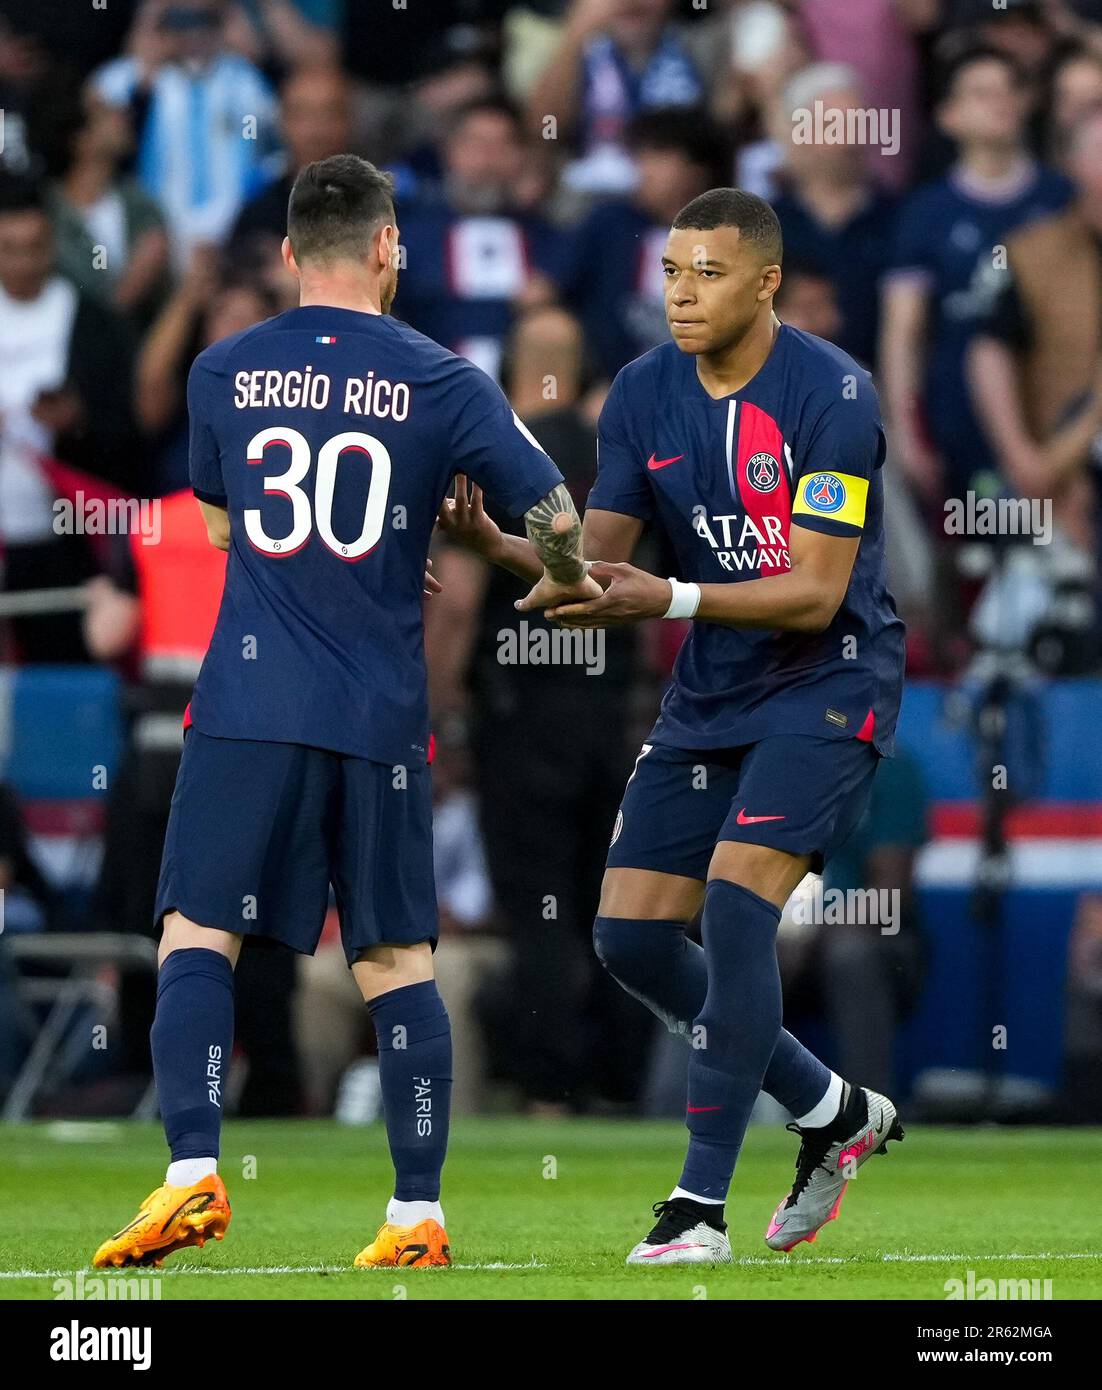 Kylian Mbappe celebrates his goal with Lionel Messi of PSG during the Ligue 1 match between Paris Saint Germain and Clermont Foot at Parc des Princes, Stock Photo